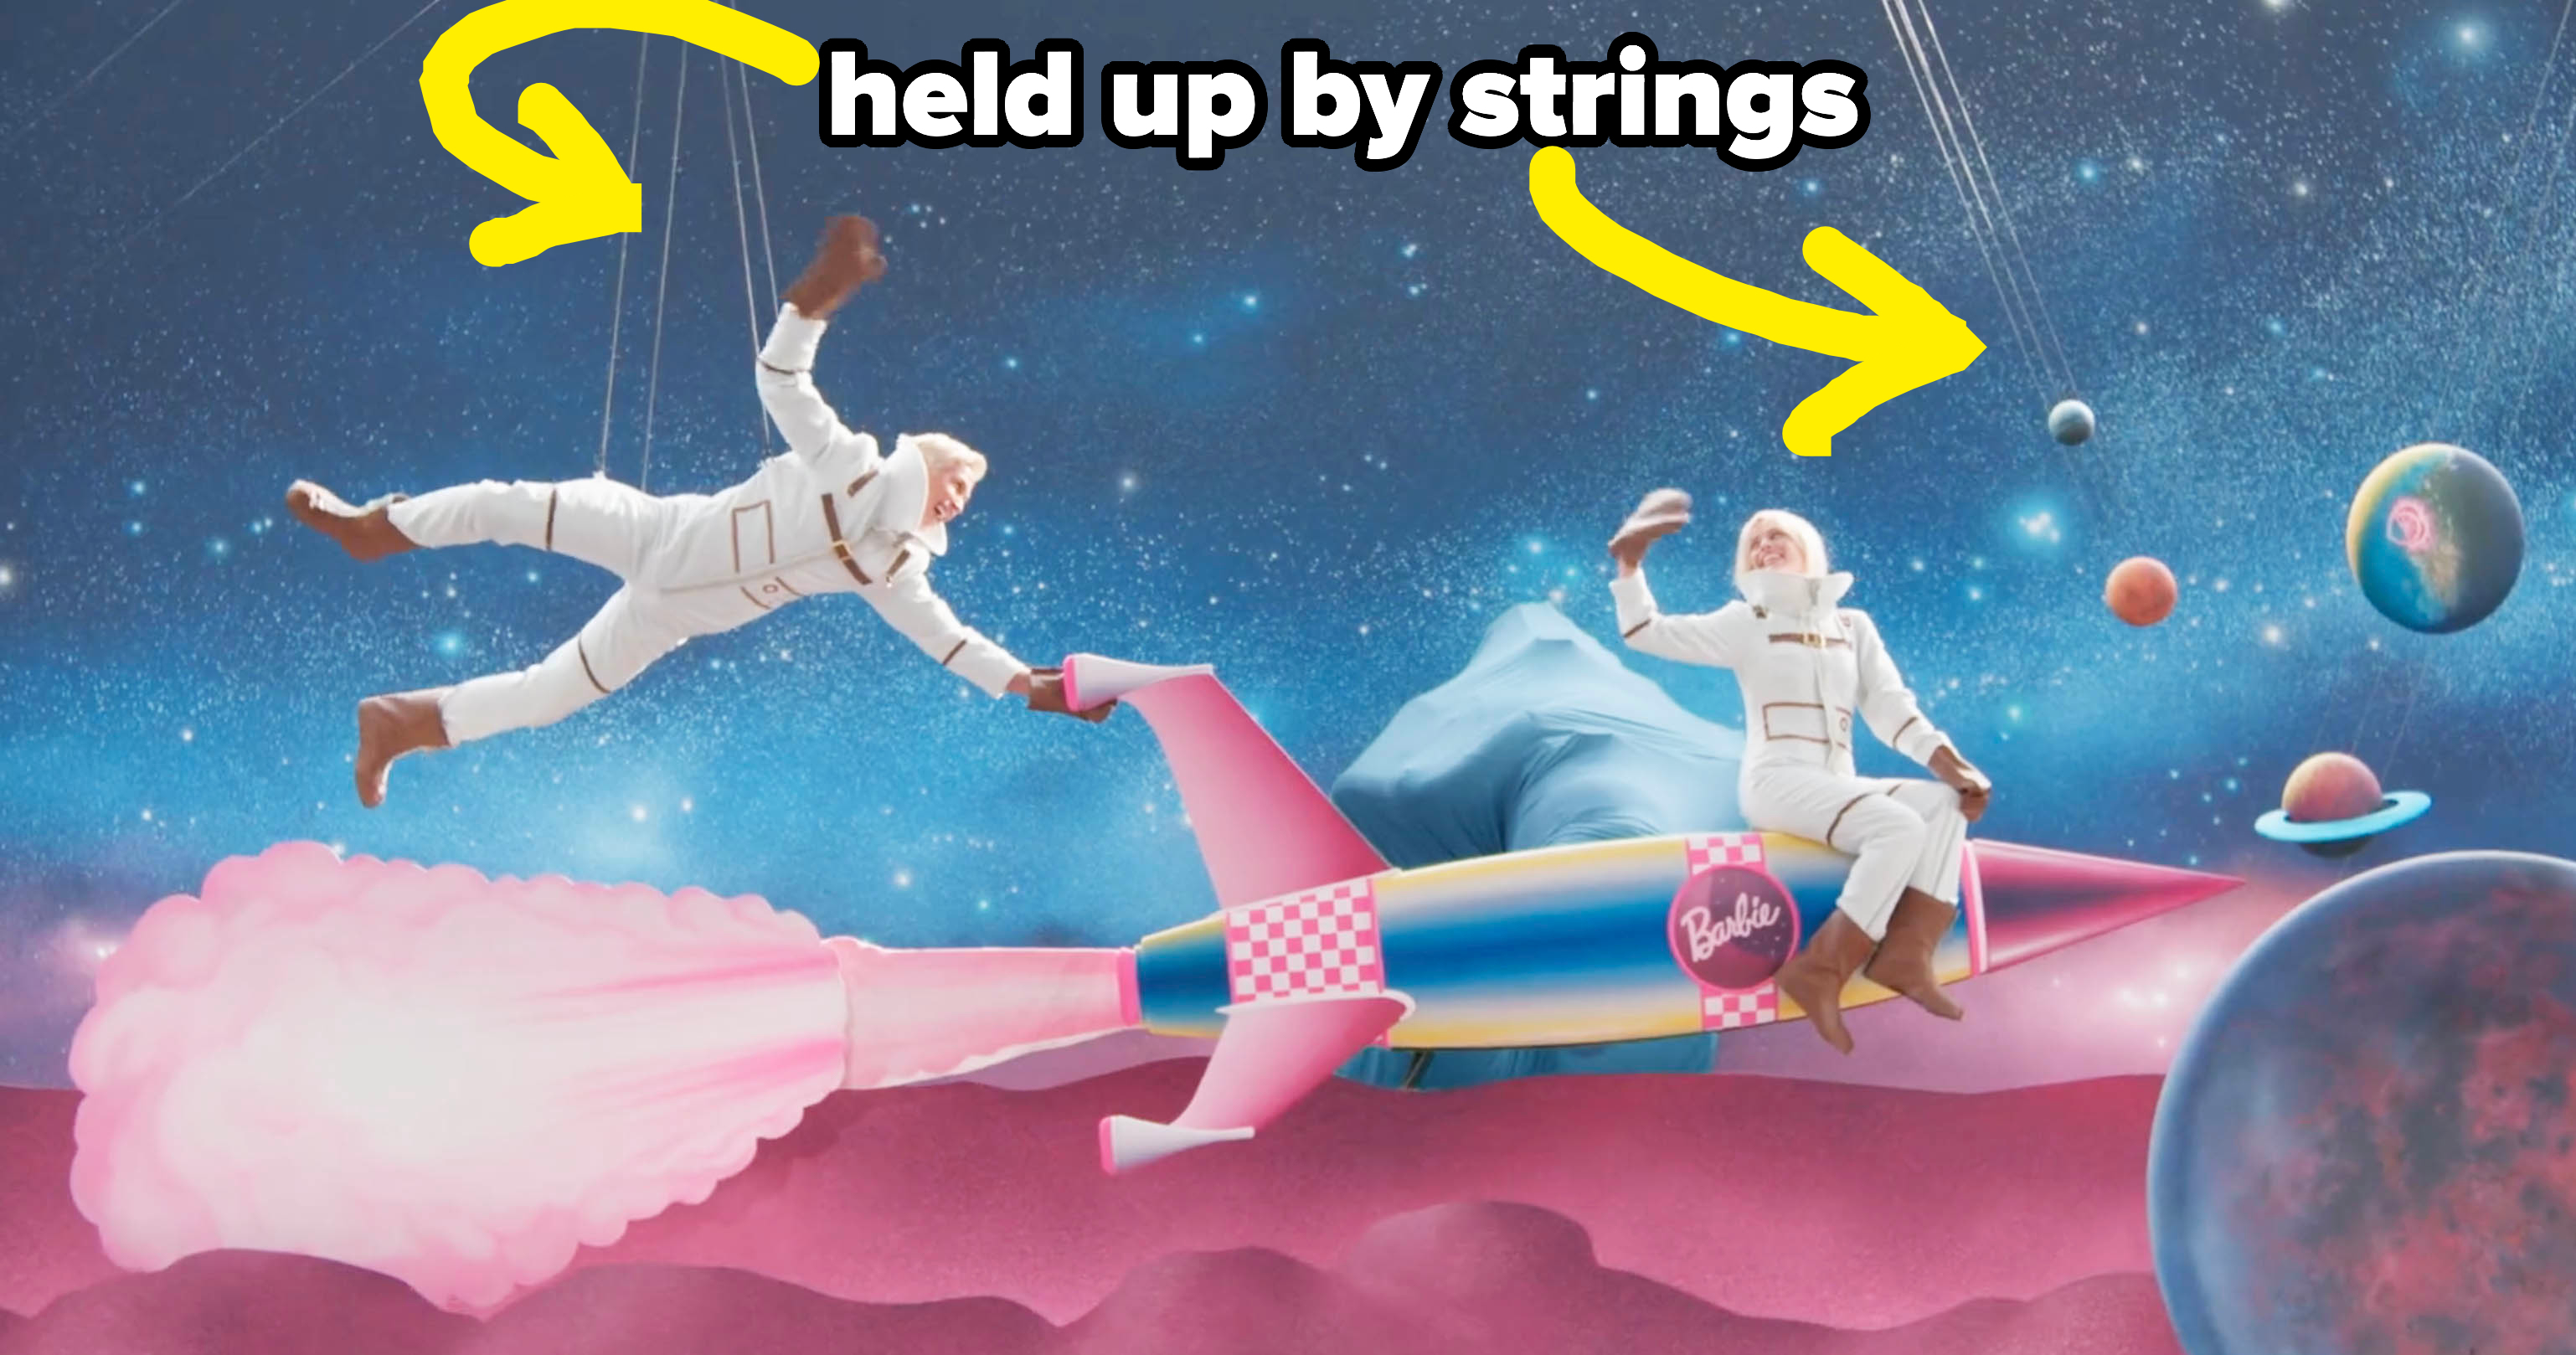 Ryan and planets being held up by strings during the space sequence